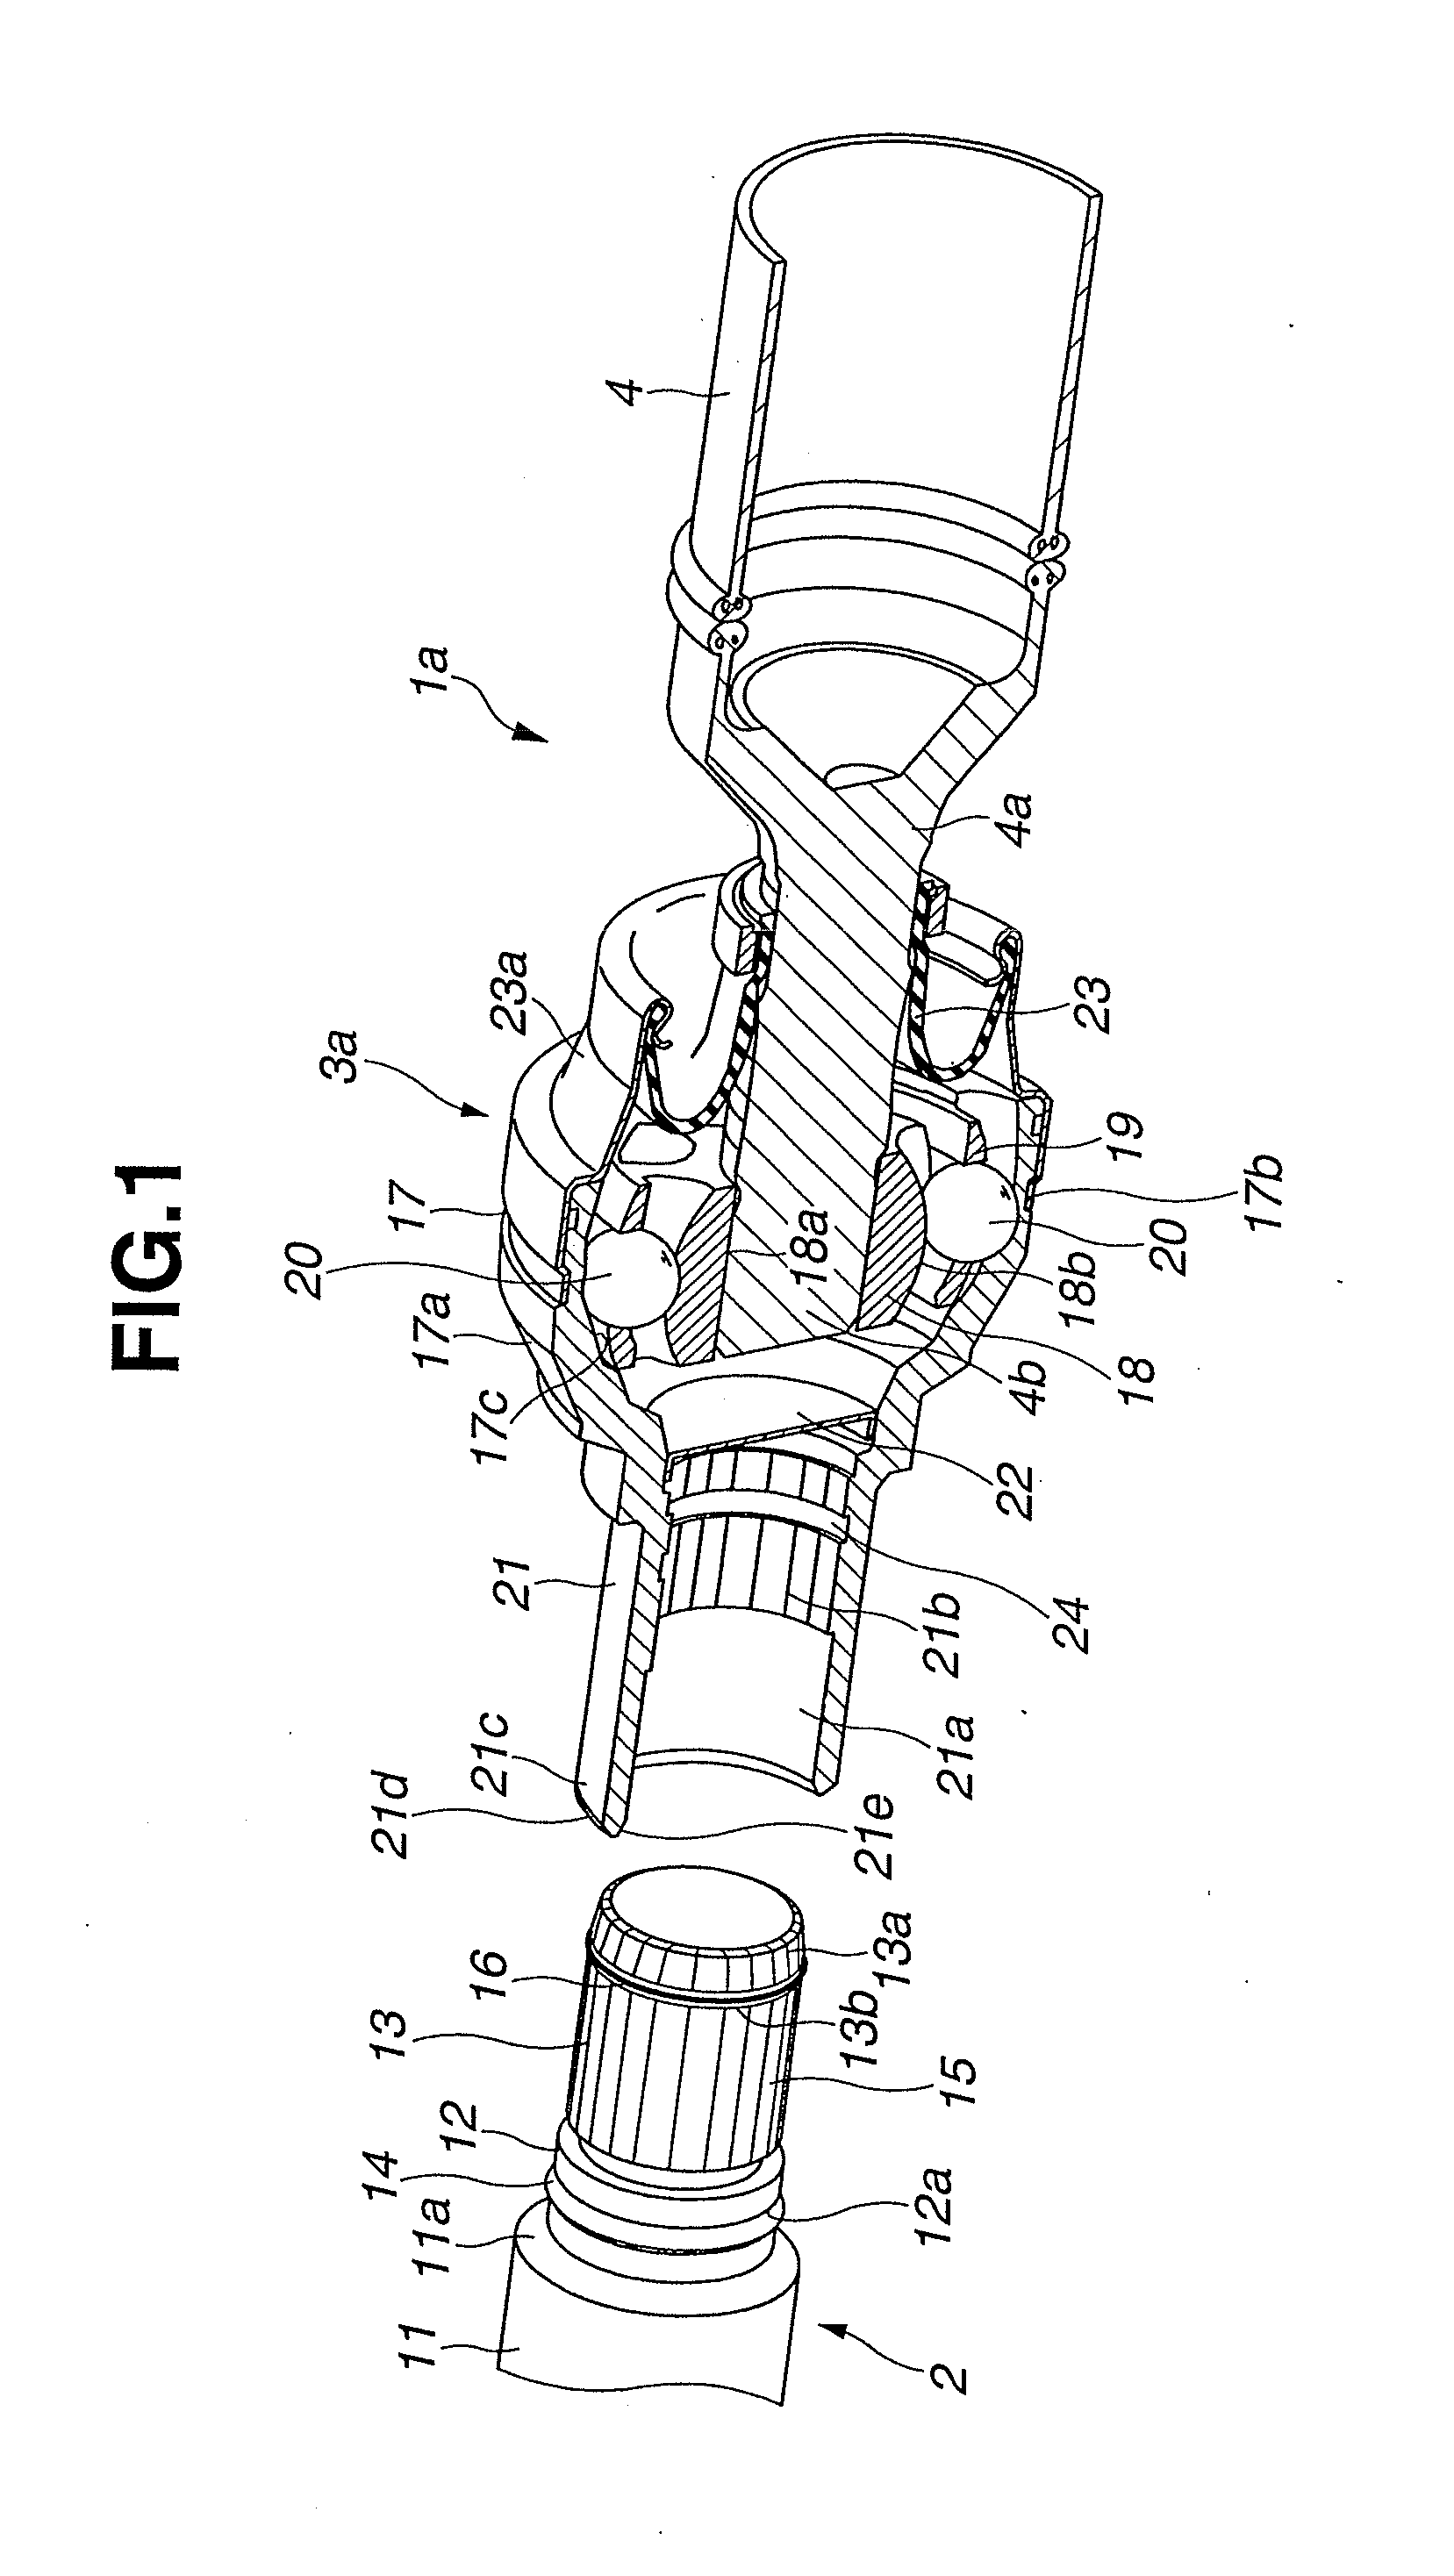 Propeller Shaft and Constant Velocity Universal Joint Used Therein